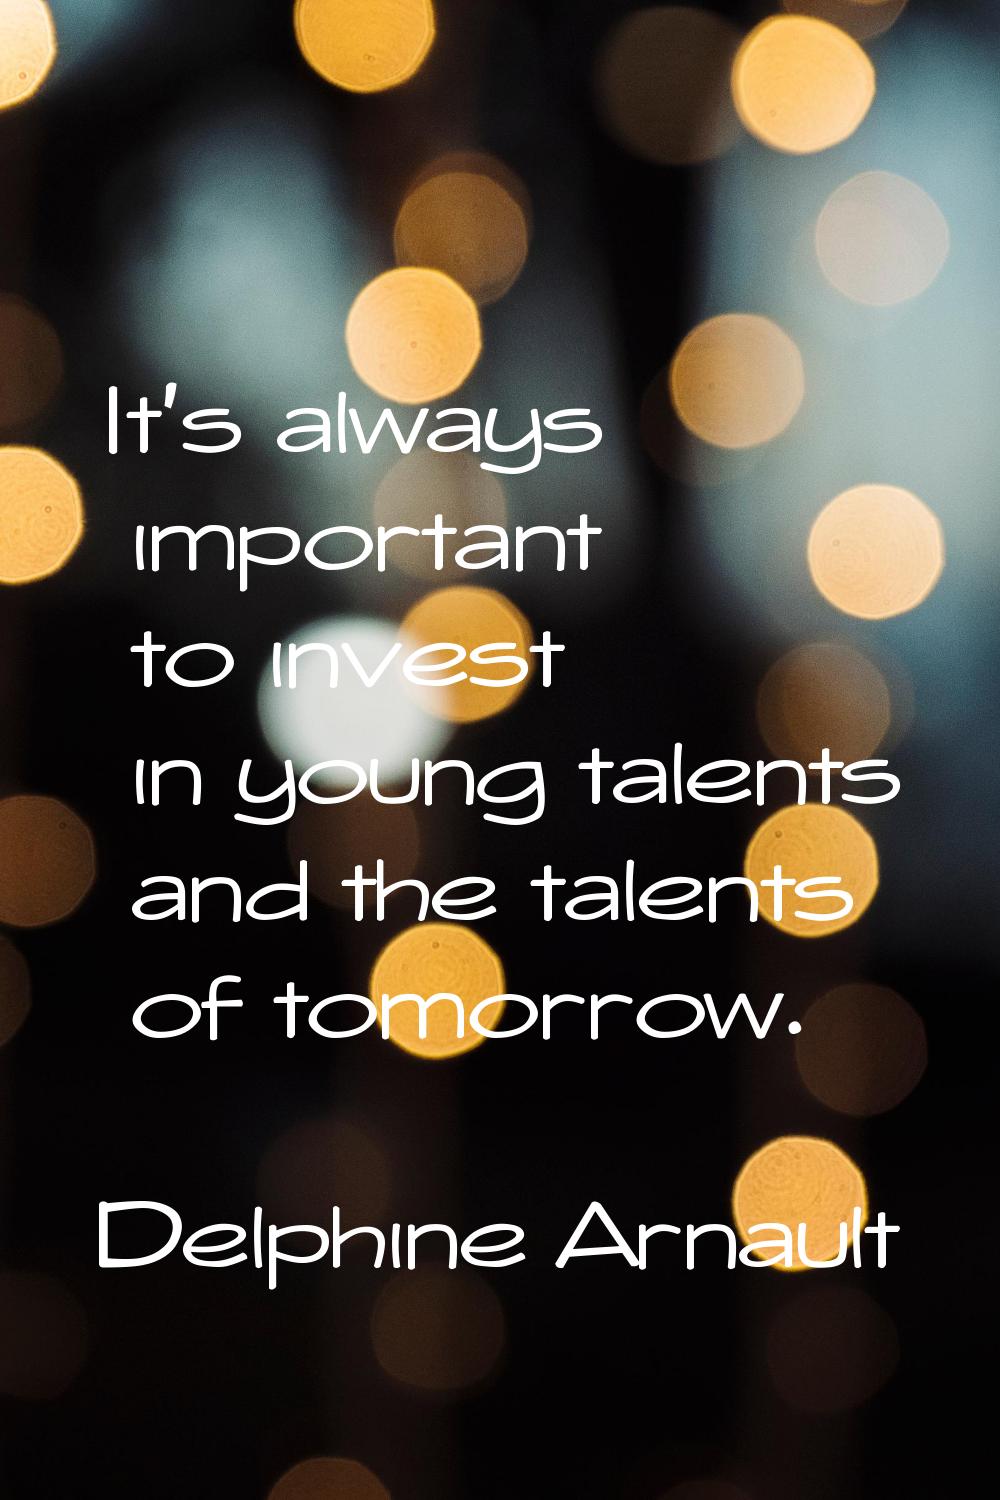 It's always important to invest in young talents and the talents of tomorrow.